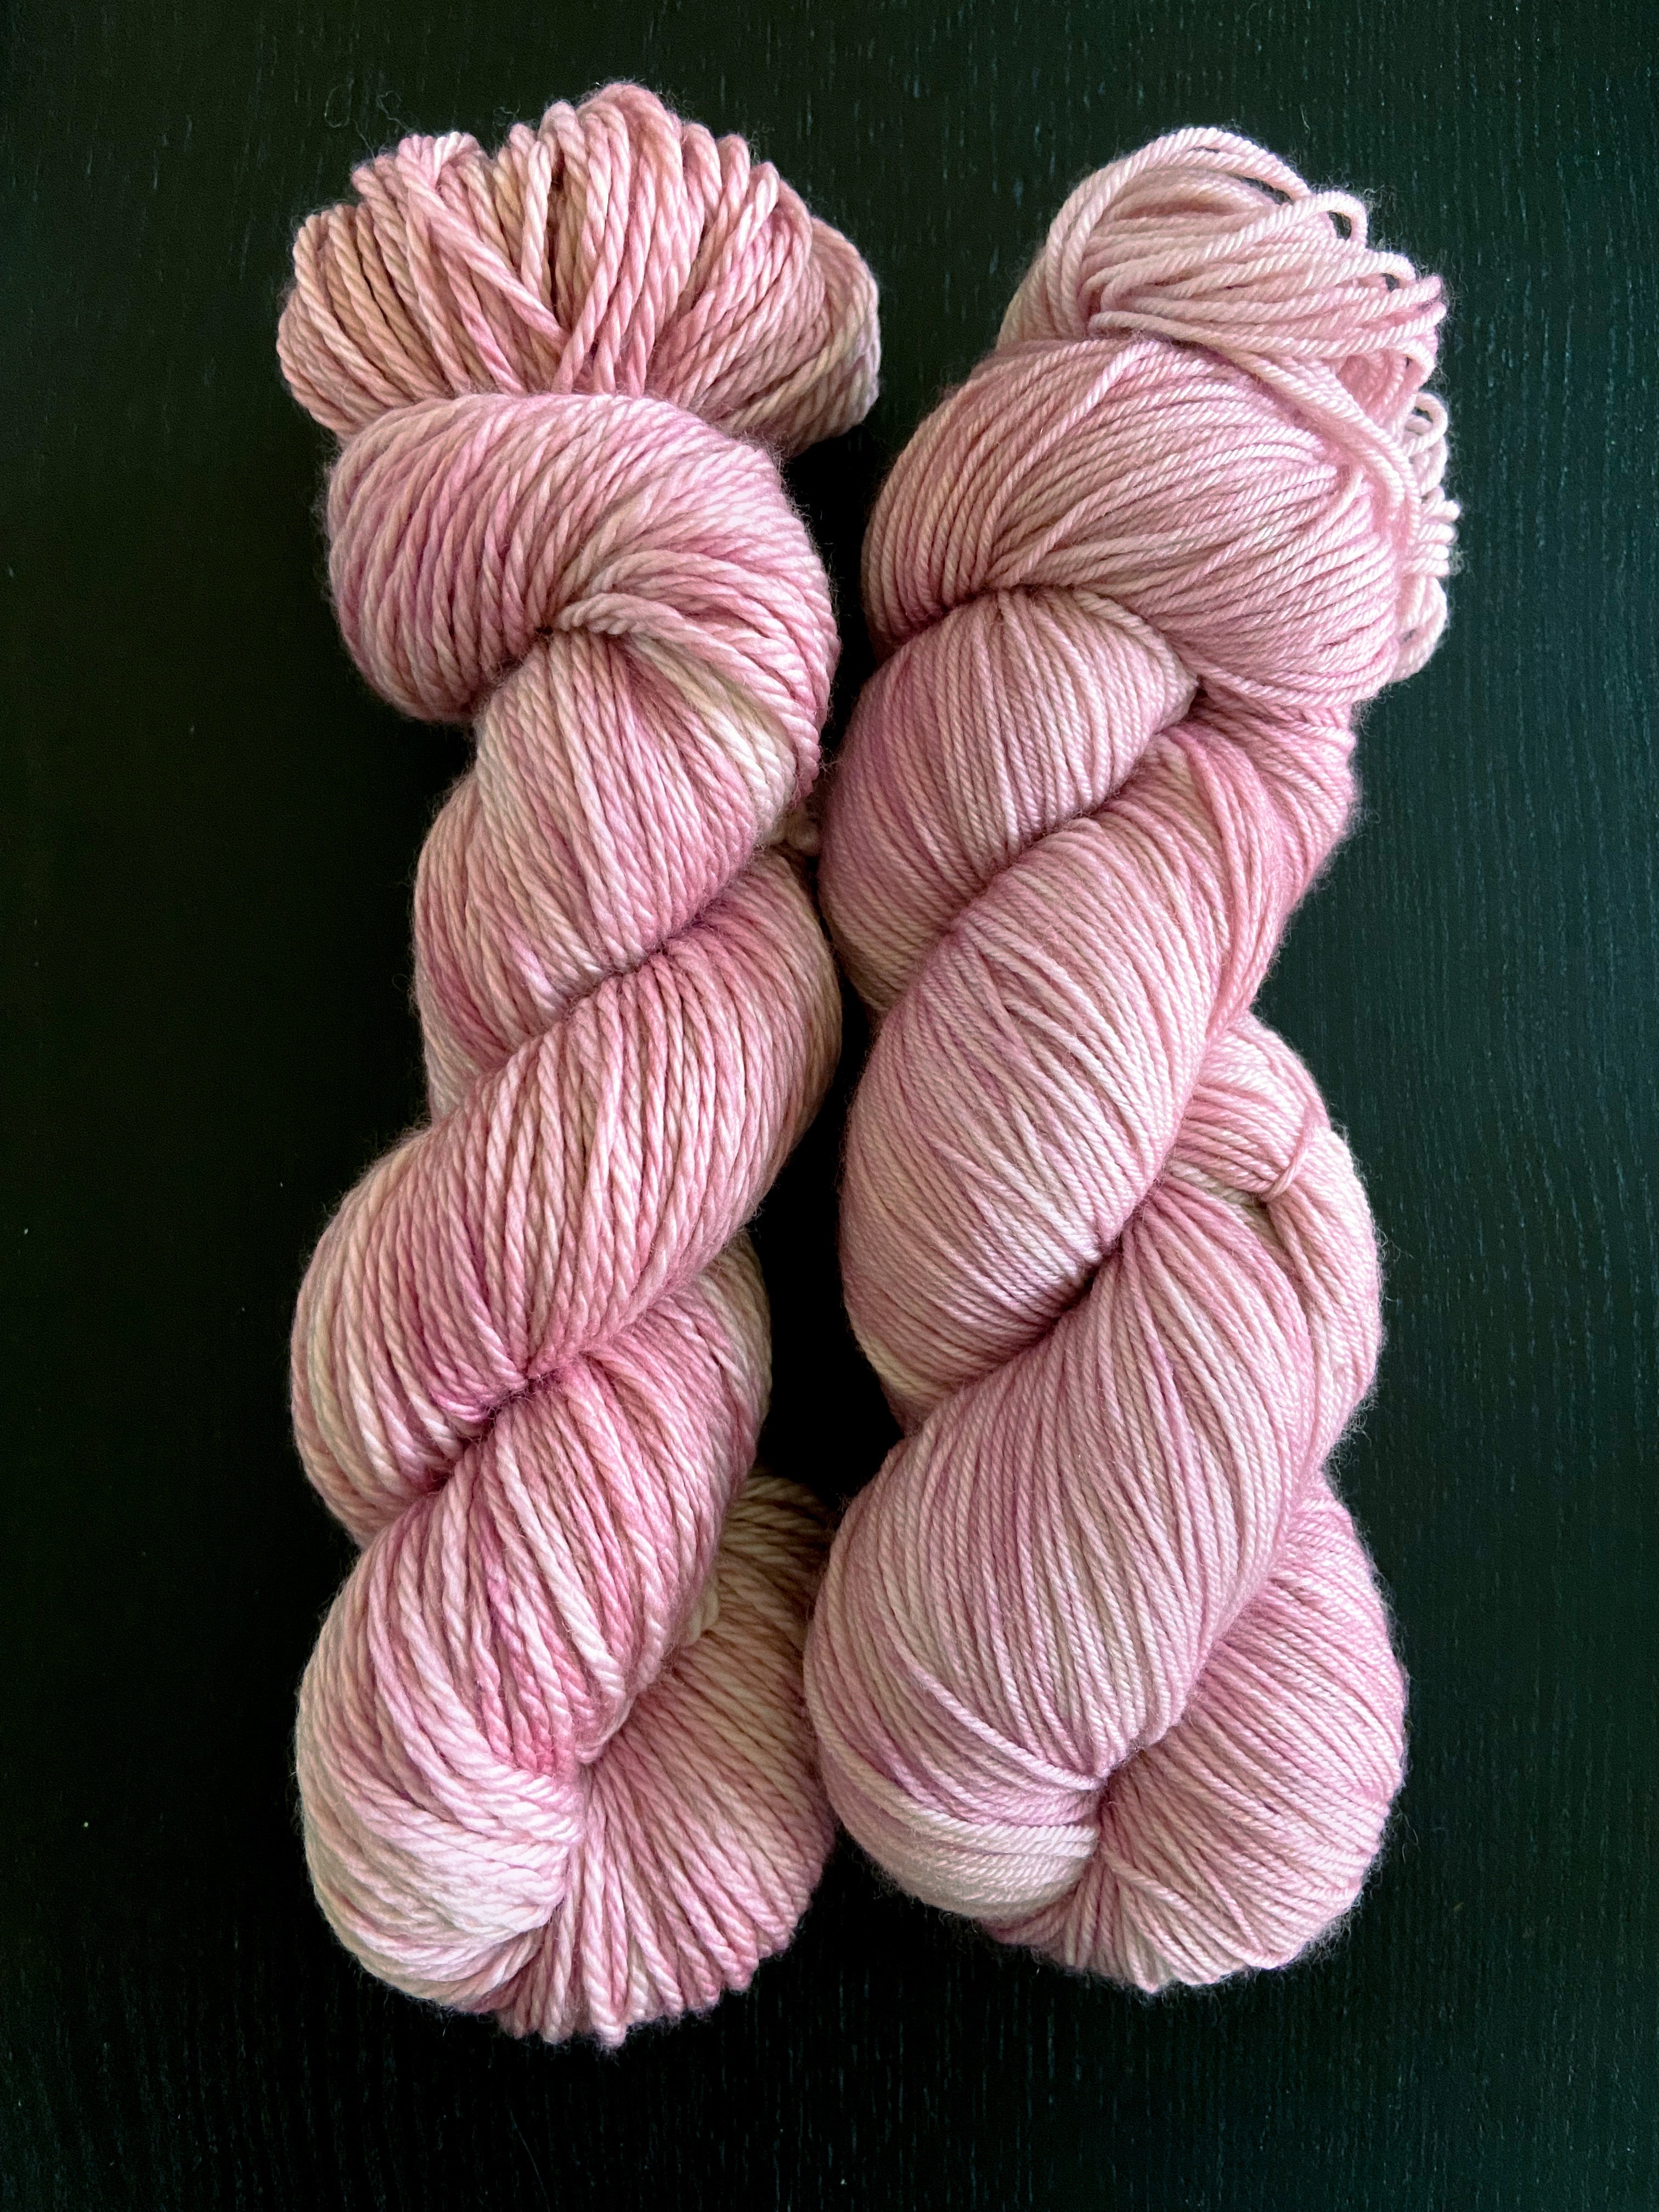 two skeins of hand dyed yarn laid side by side